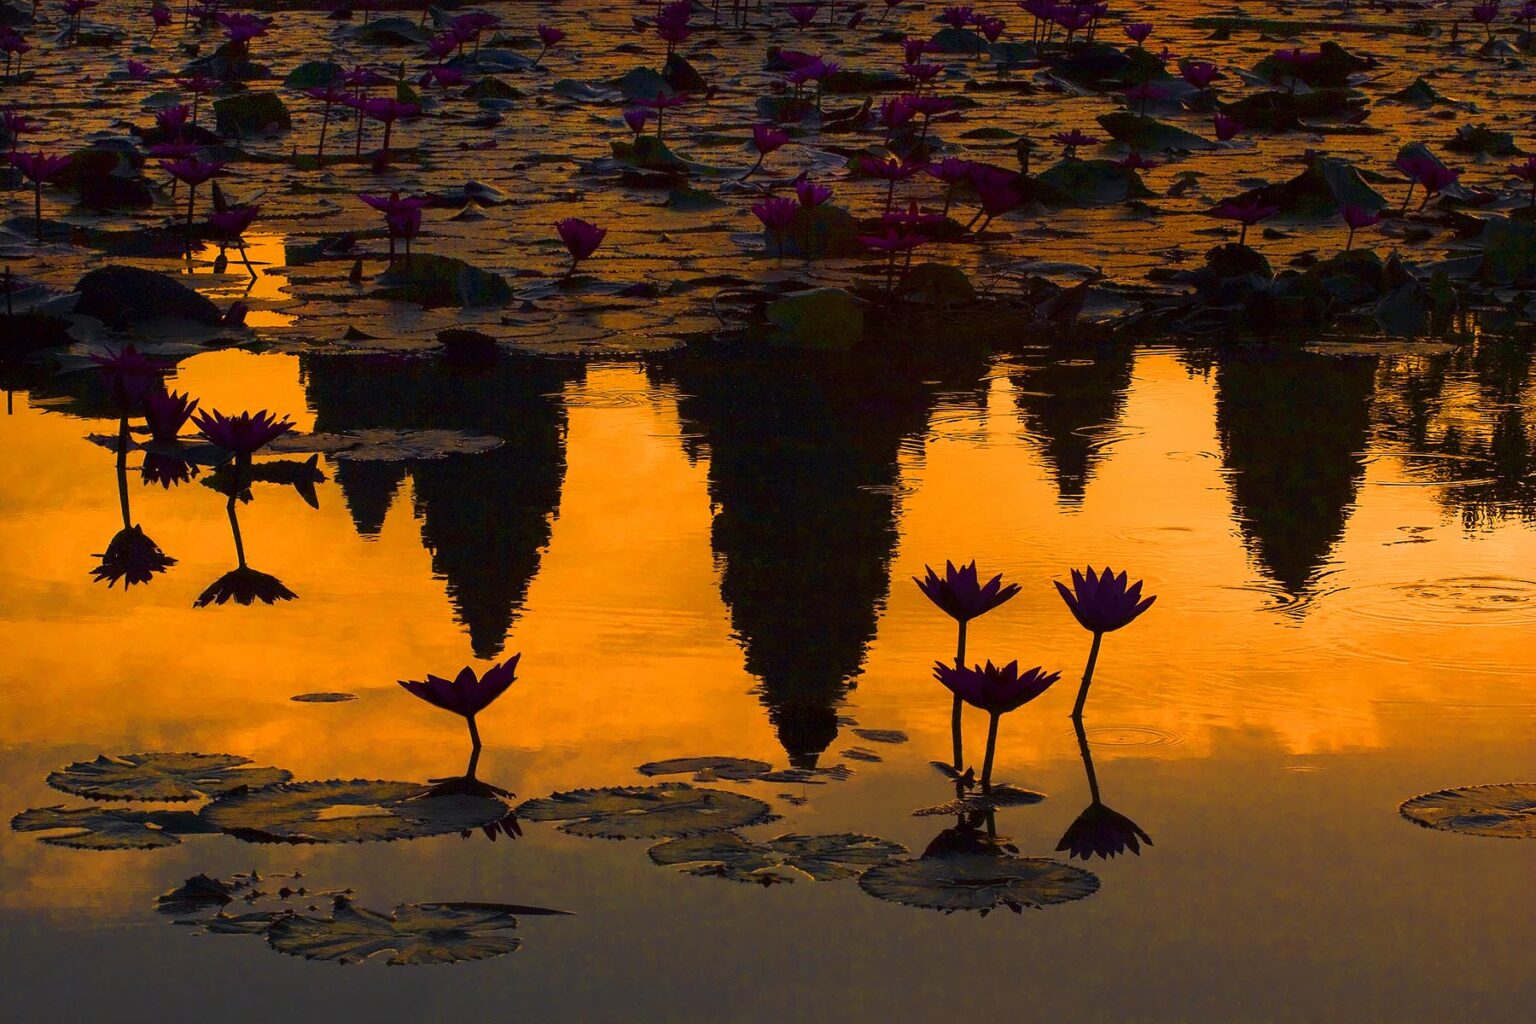 Stone temples representing the five peaks of Mount Meru reflected in a lotus pond at an Angkor Wat sunrise, built in the 11th century by Suryavarman II -  Siem Reap, Cambodia